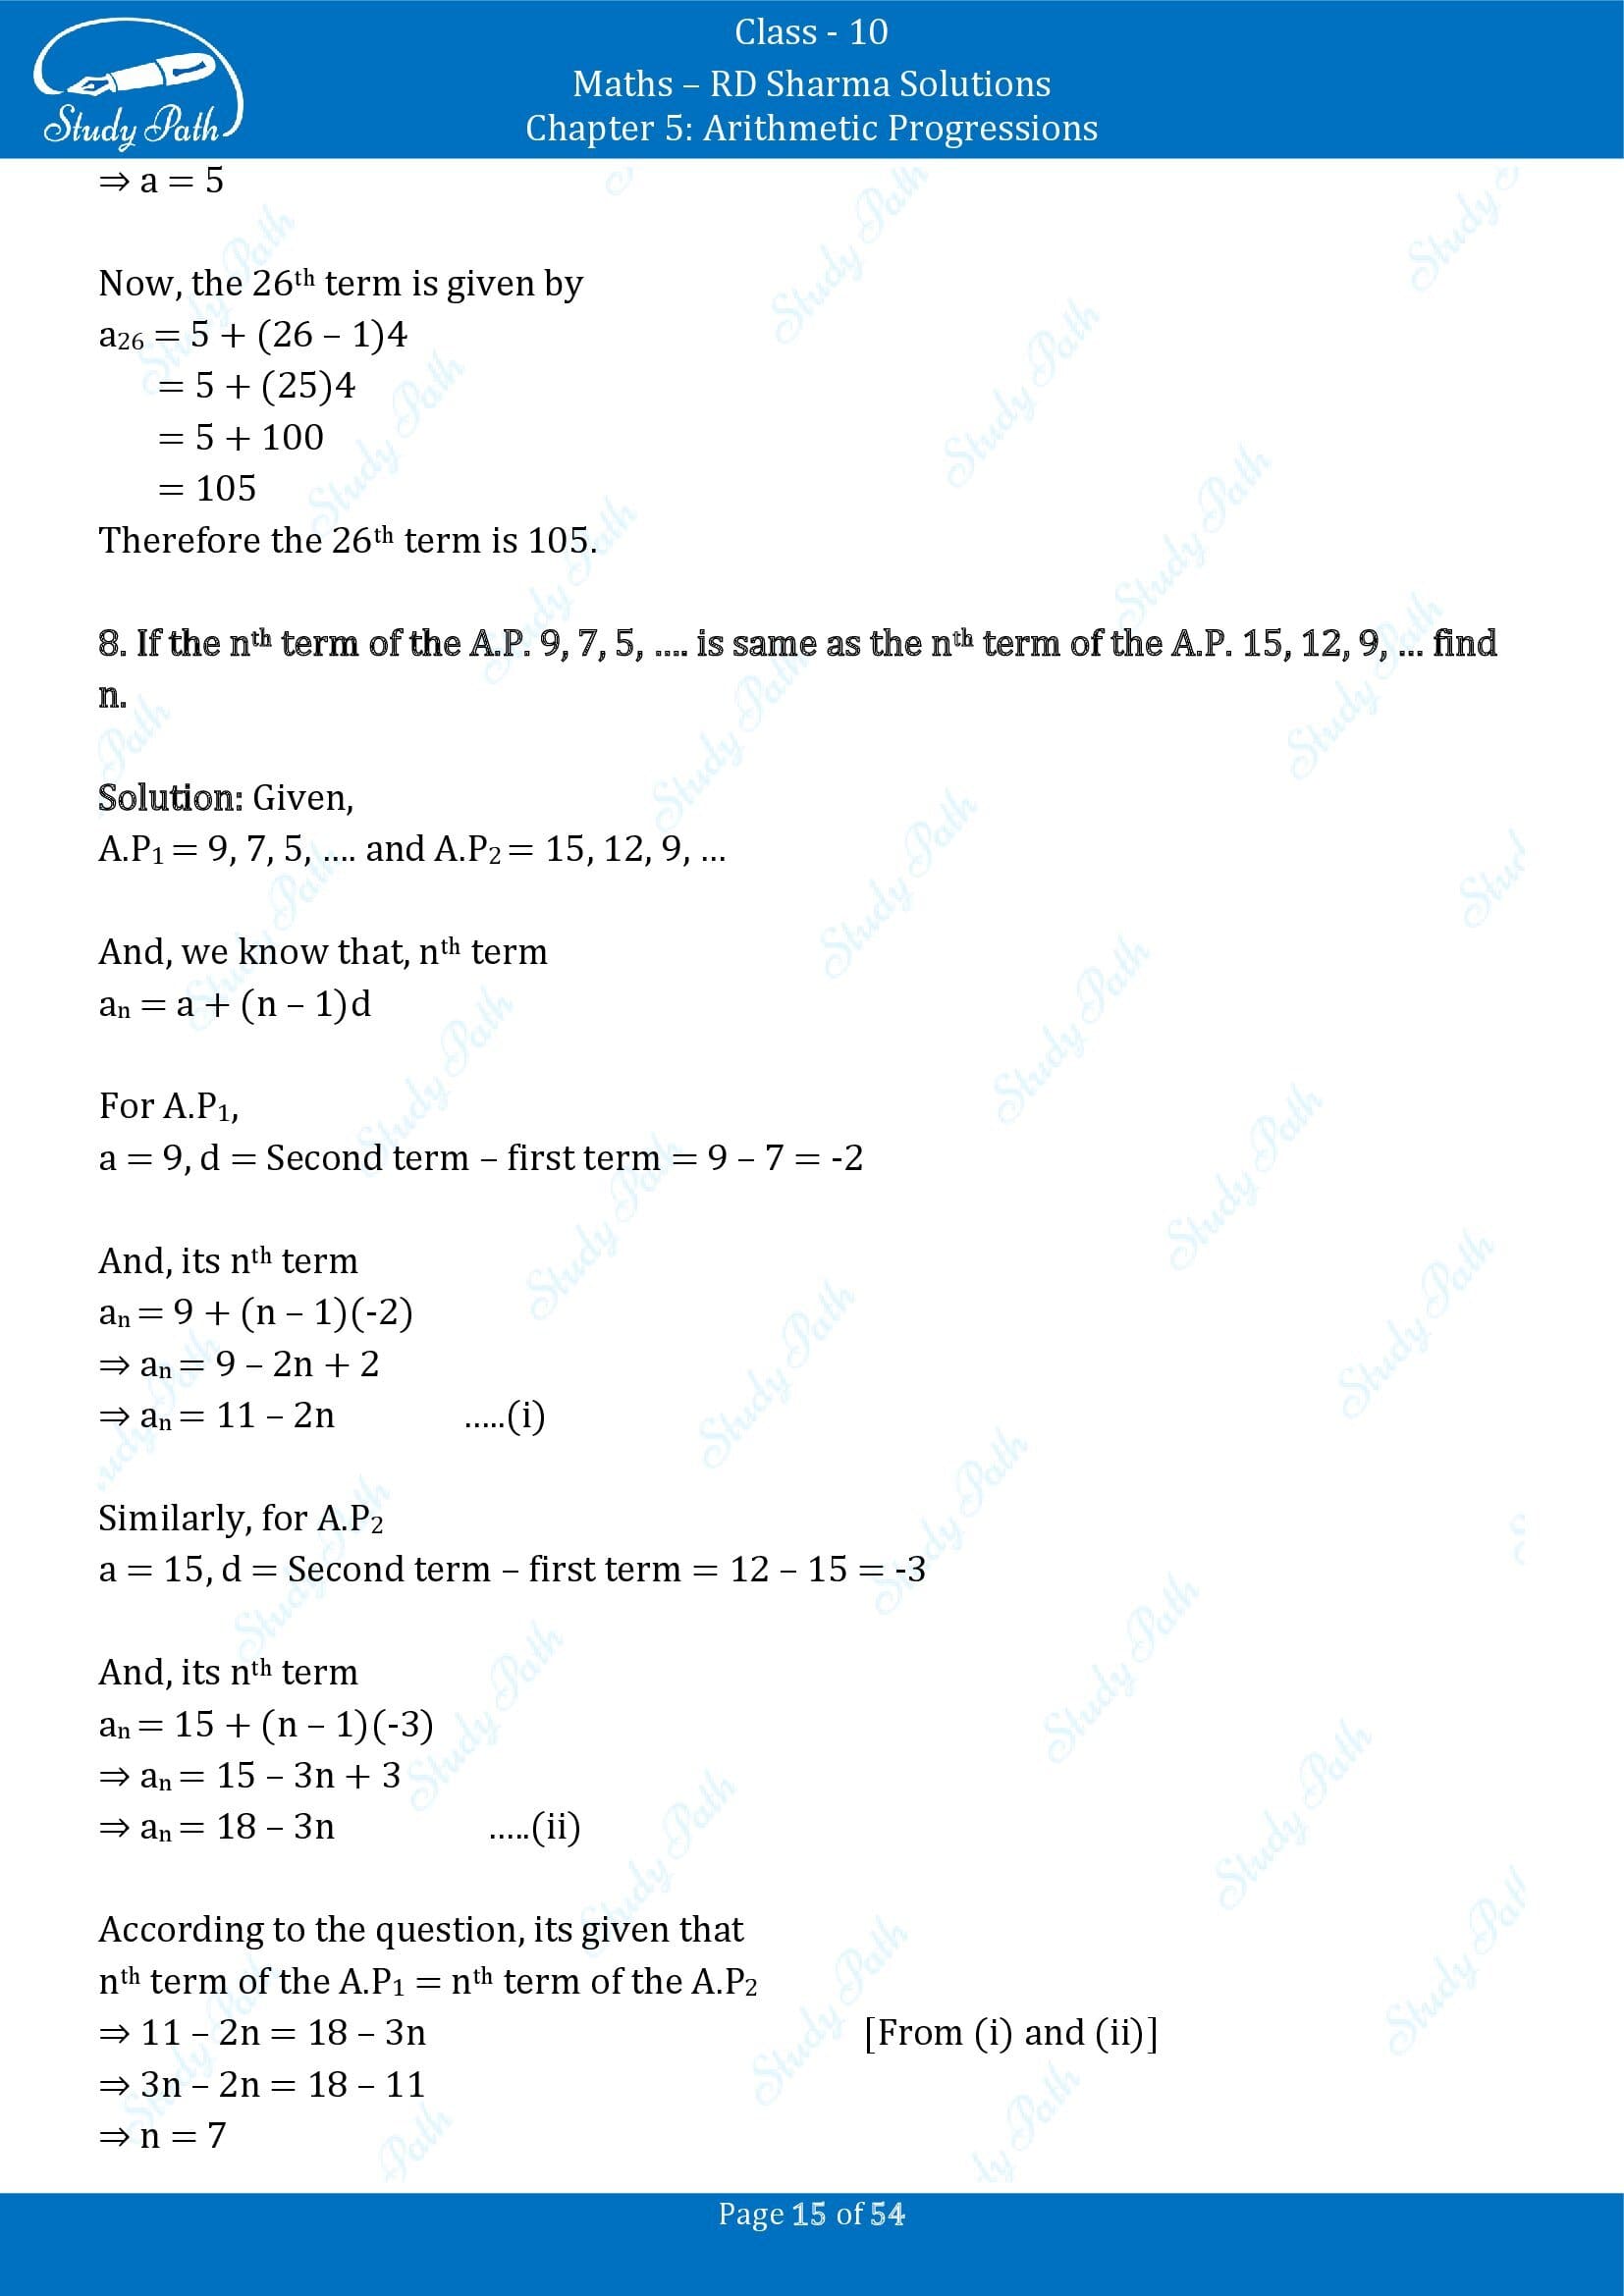 RD Sharma Solutions Class 10 Chapter 5 Arithmetic Progressions Exercise 5.4 00015